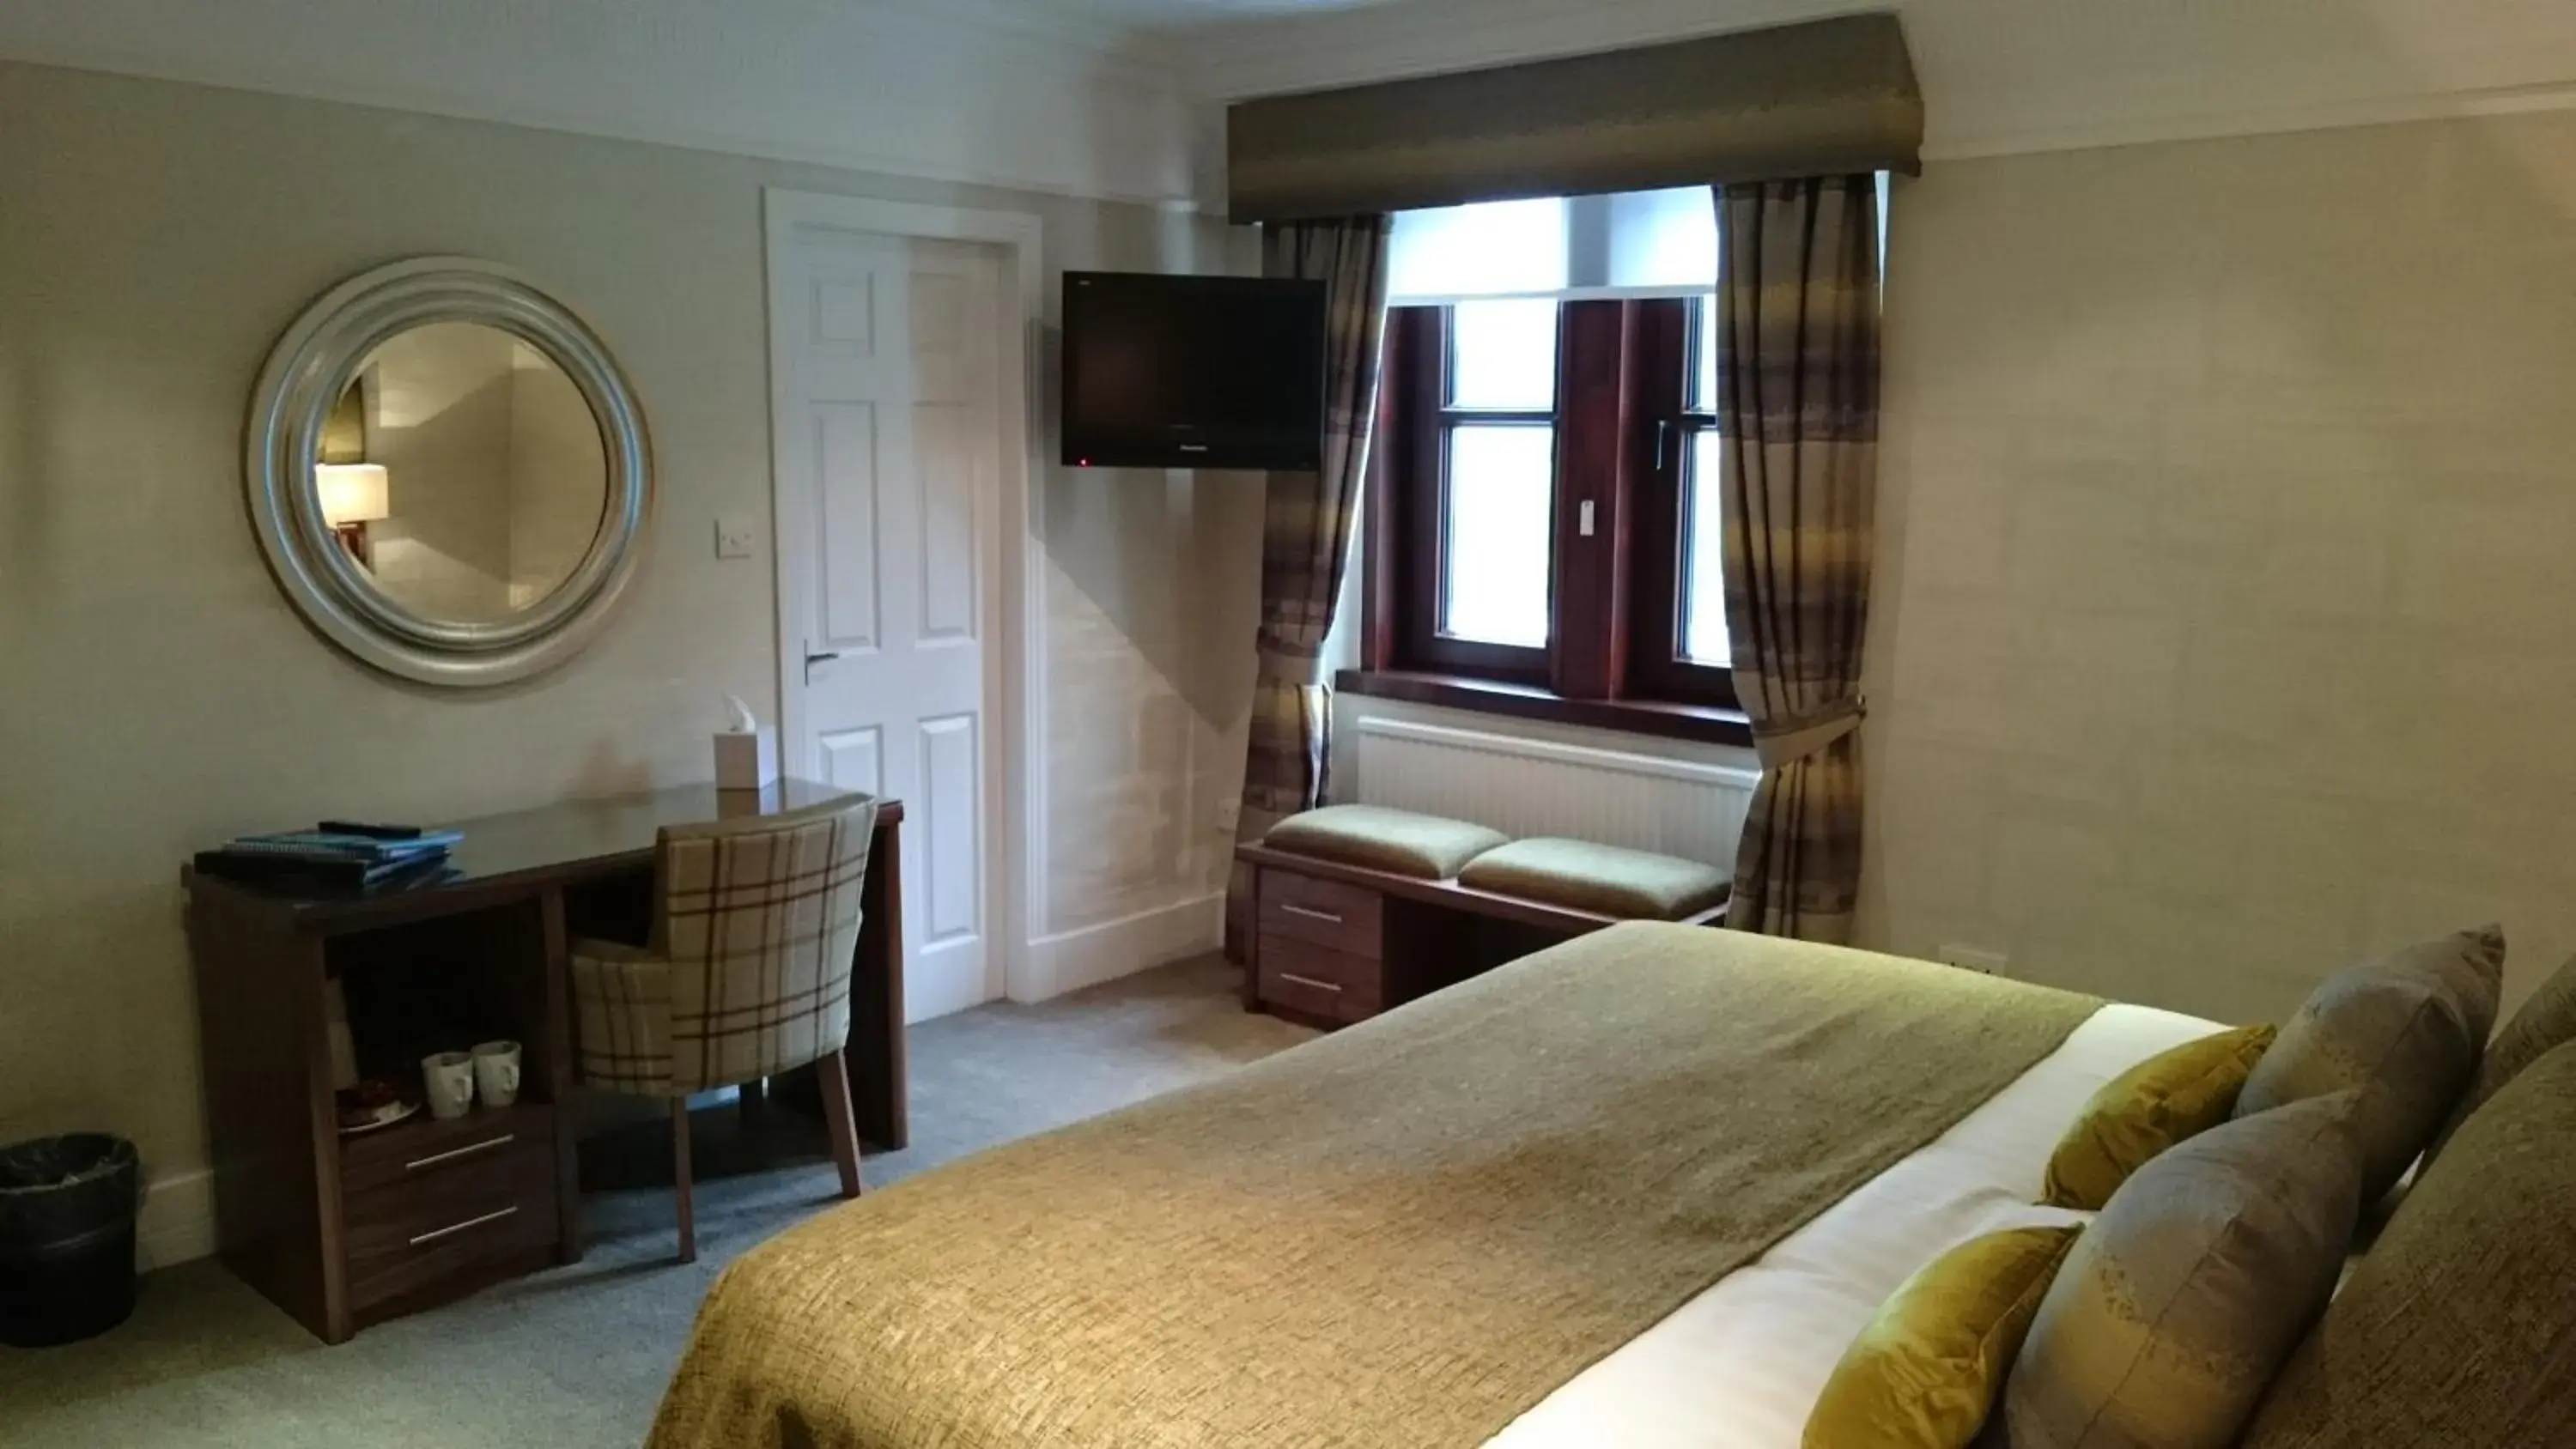 Day, Room Photo in Craigmonie Hotel Inverness by Compass Hospitality